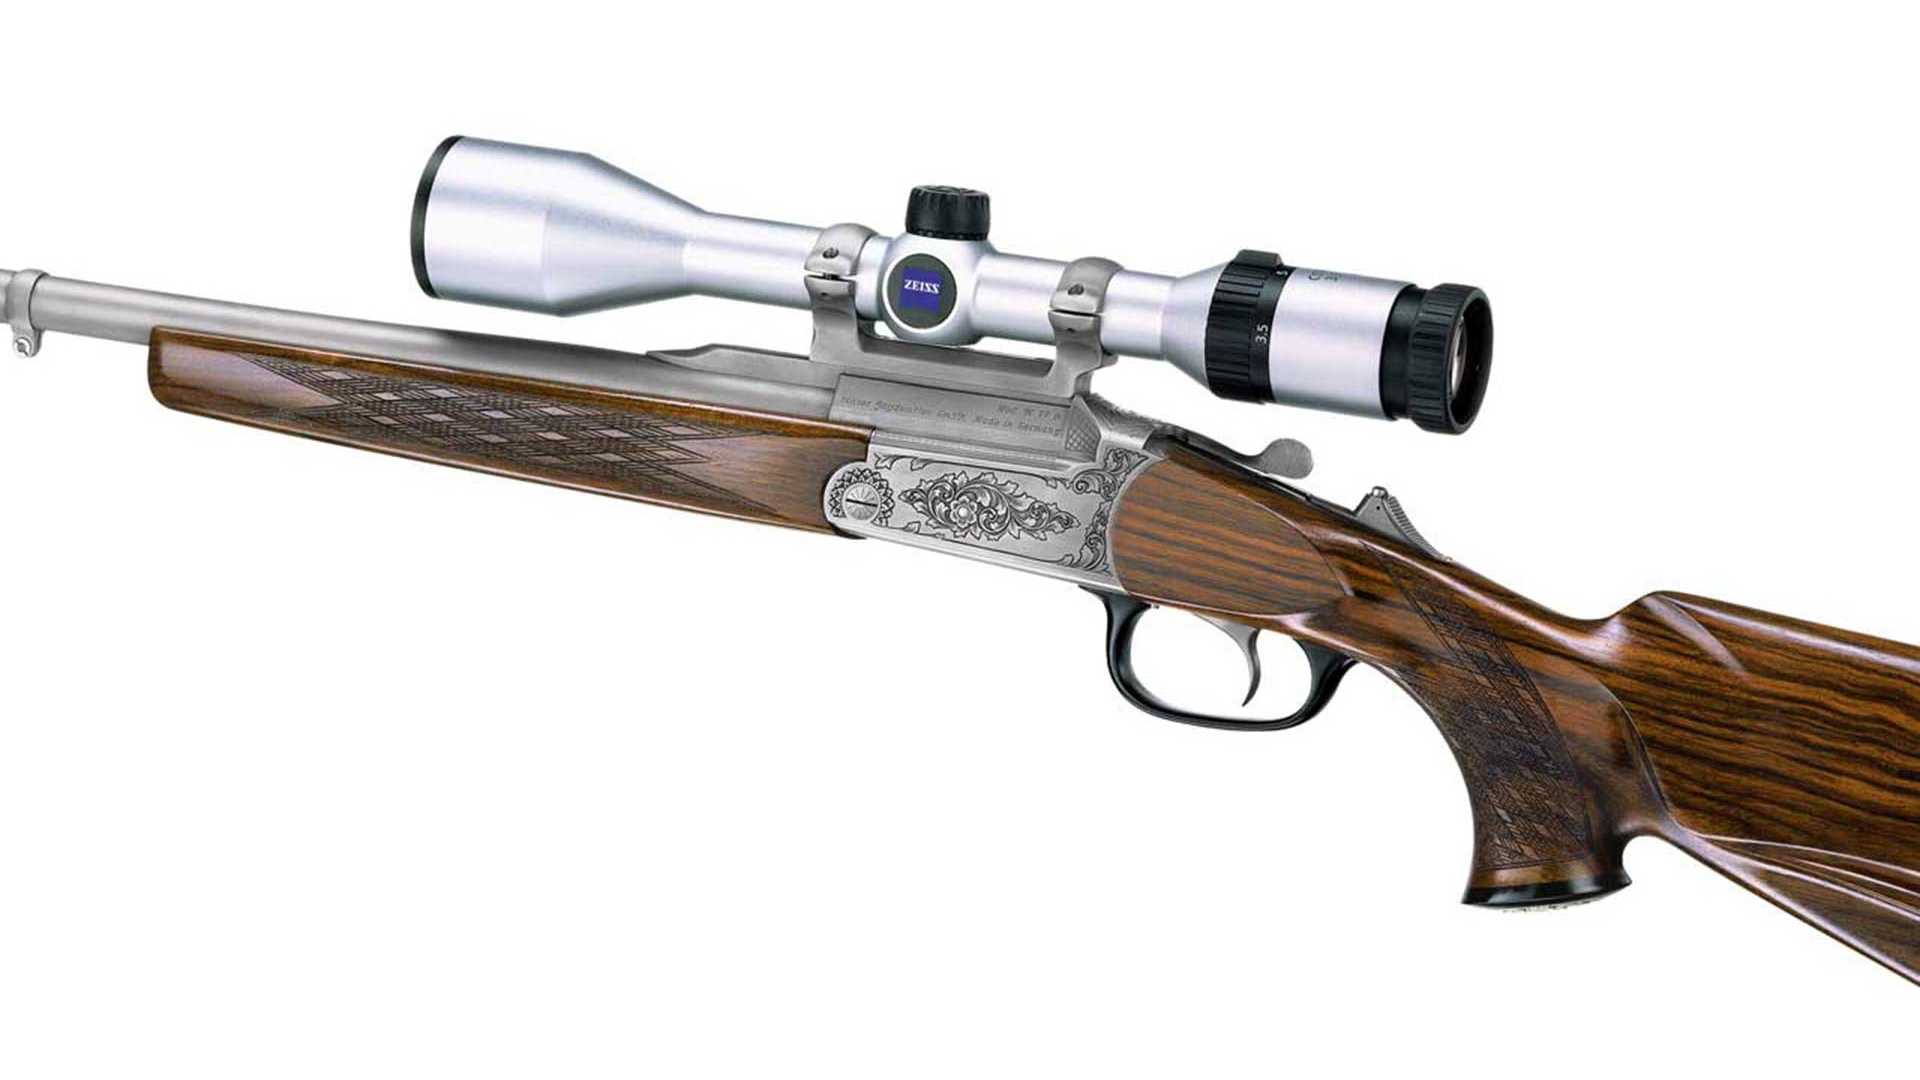 Conquest riflescope for American hunting rifles